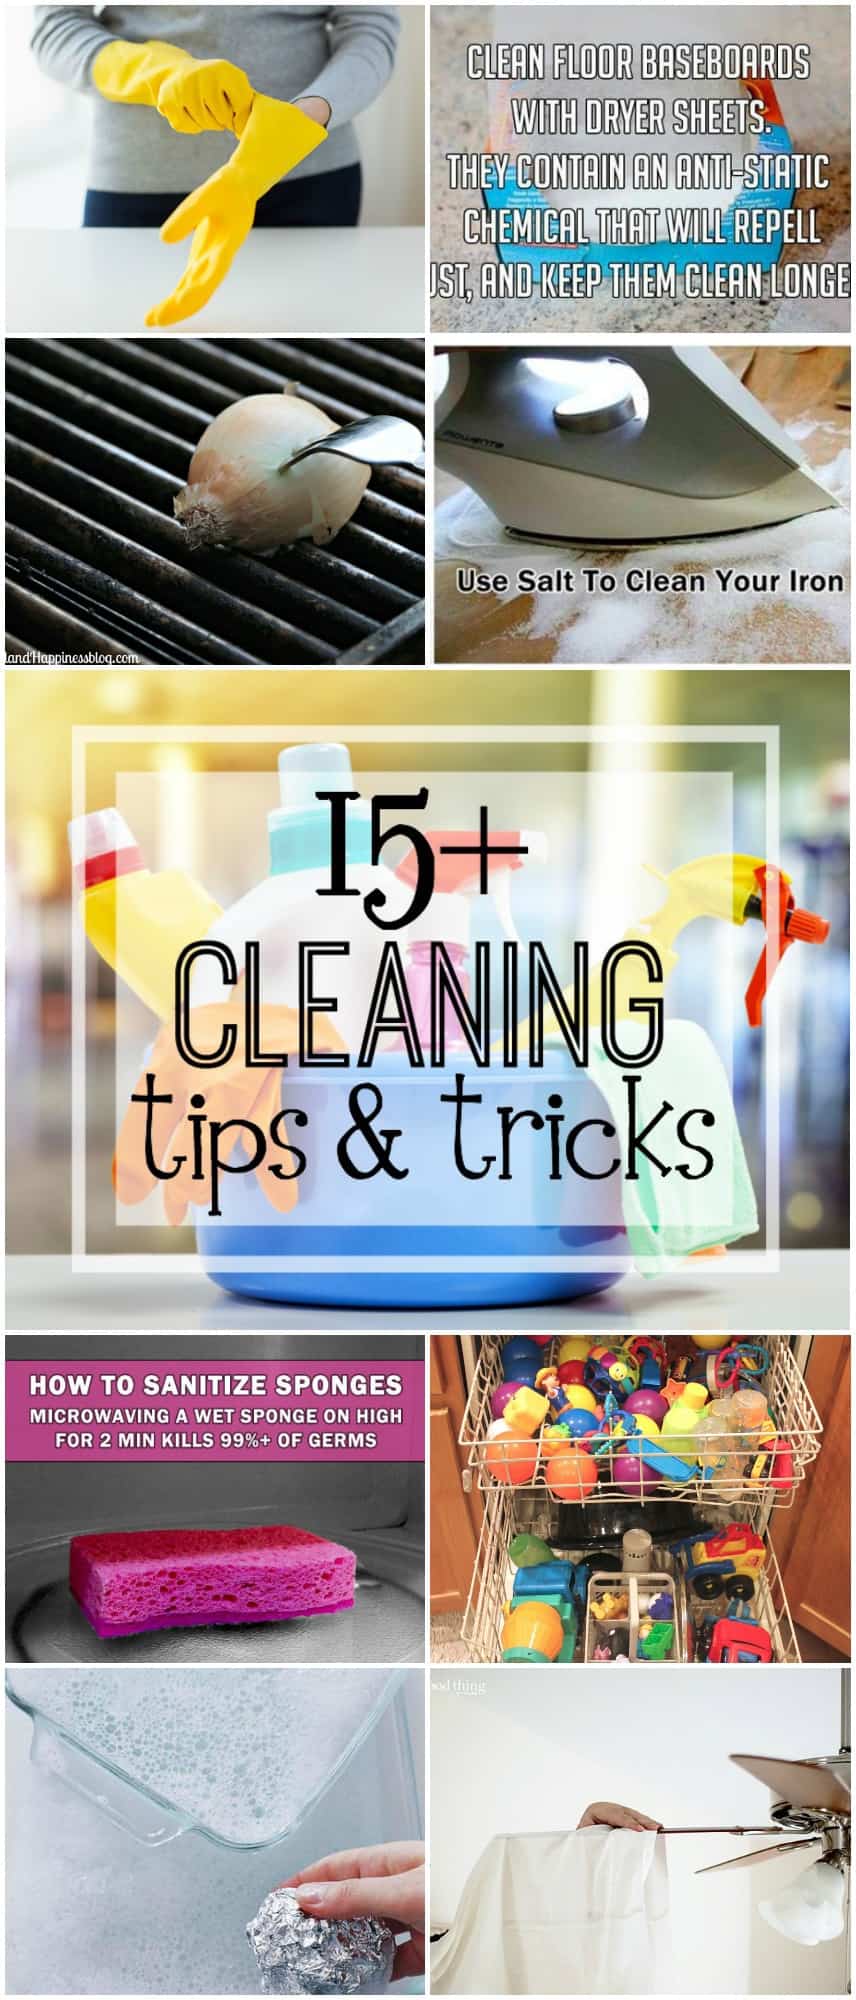 Cleaning Tips and Tricks